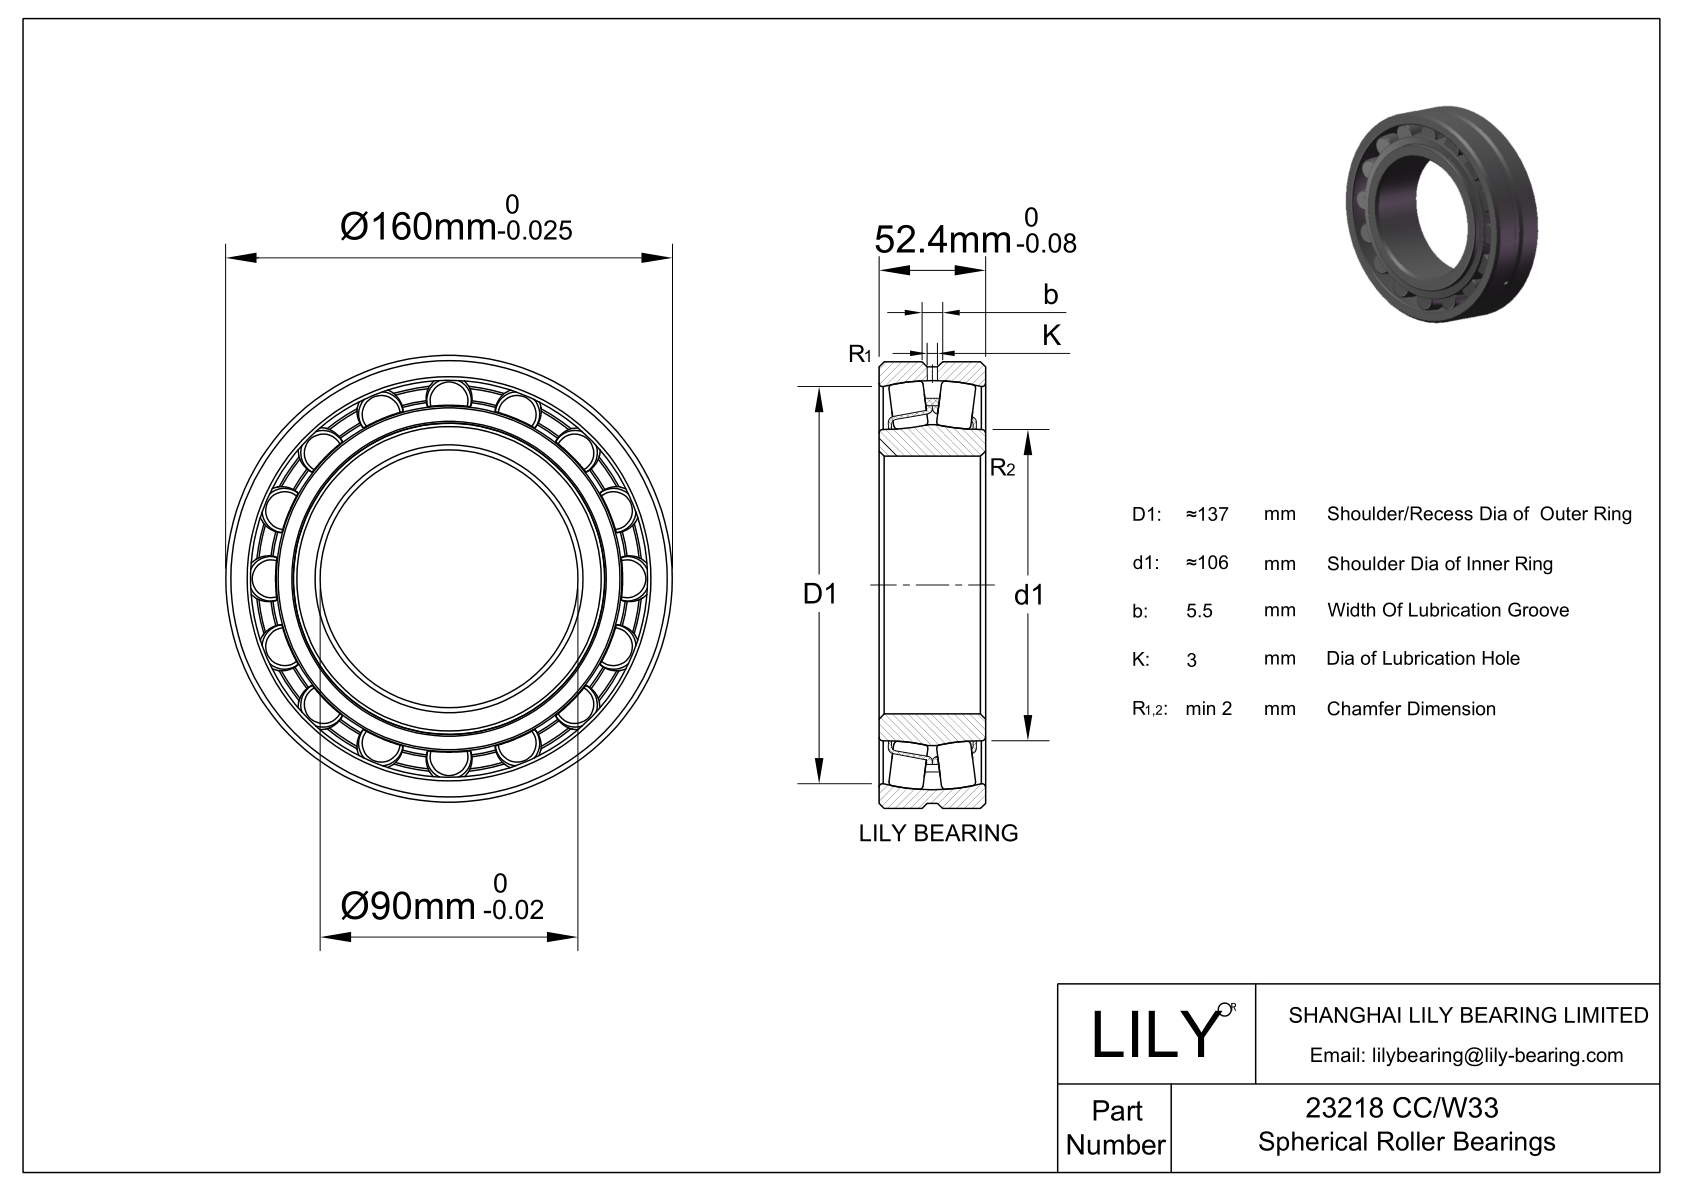 23218 CC/W33 Double Row Spherical Roller Bearing cad drawing